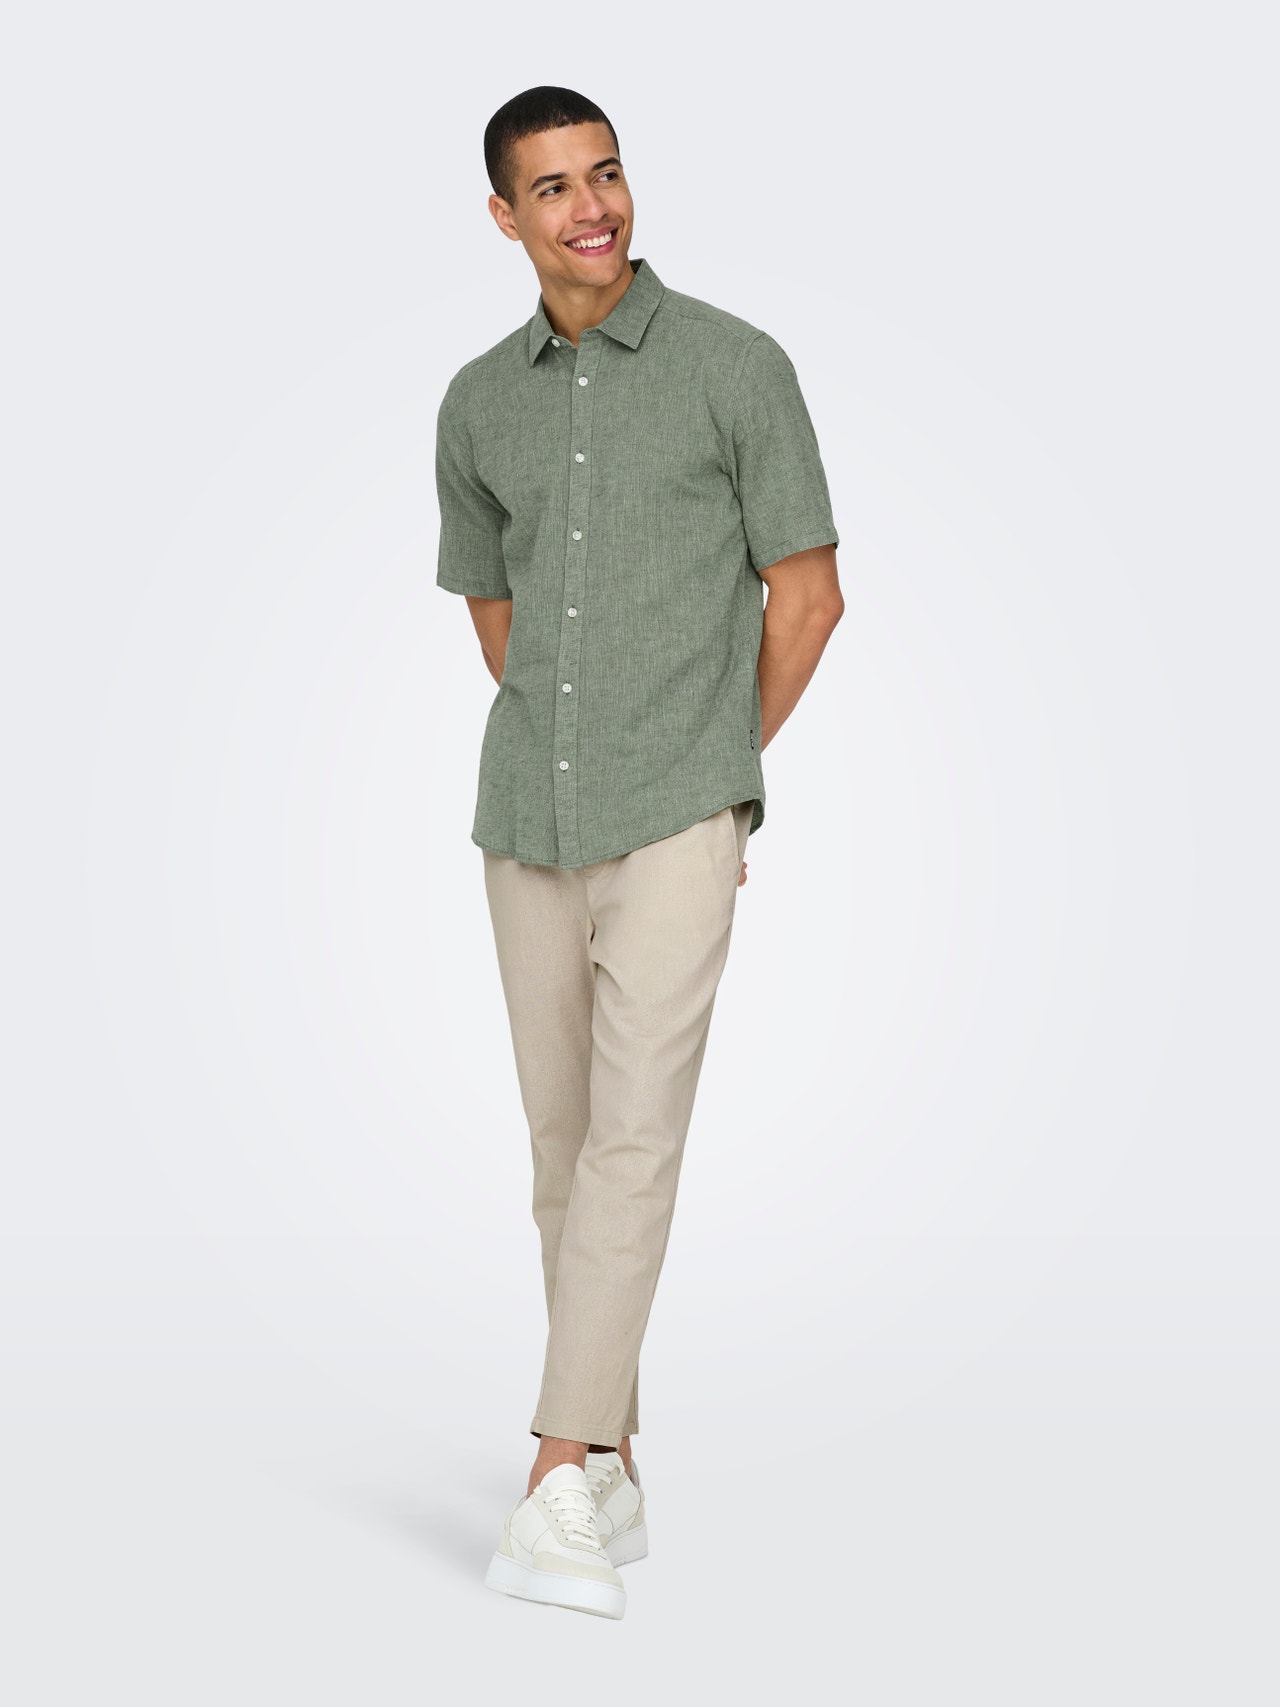 ONLY & SONS Short sleeved shirt -Swamp - 22009885